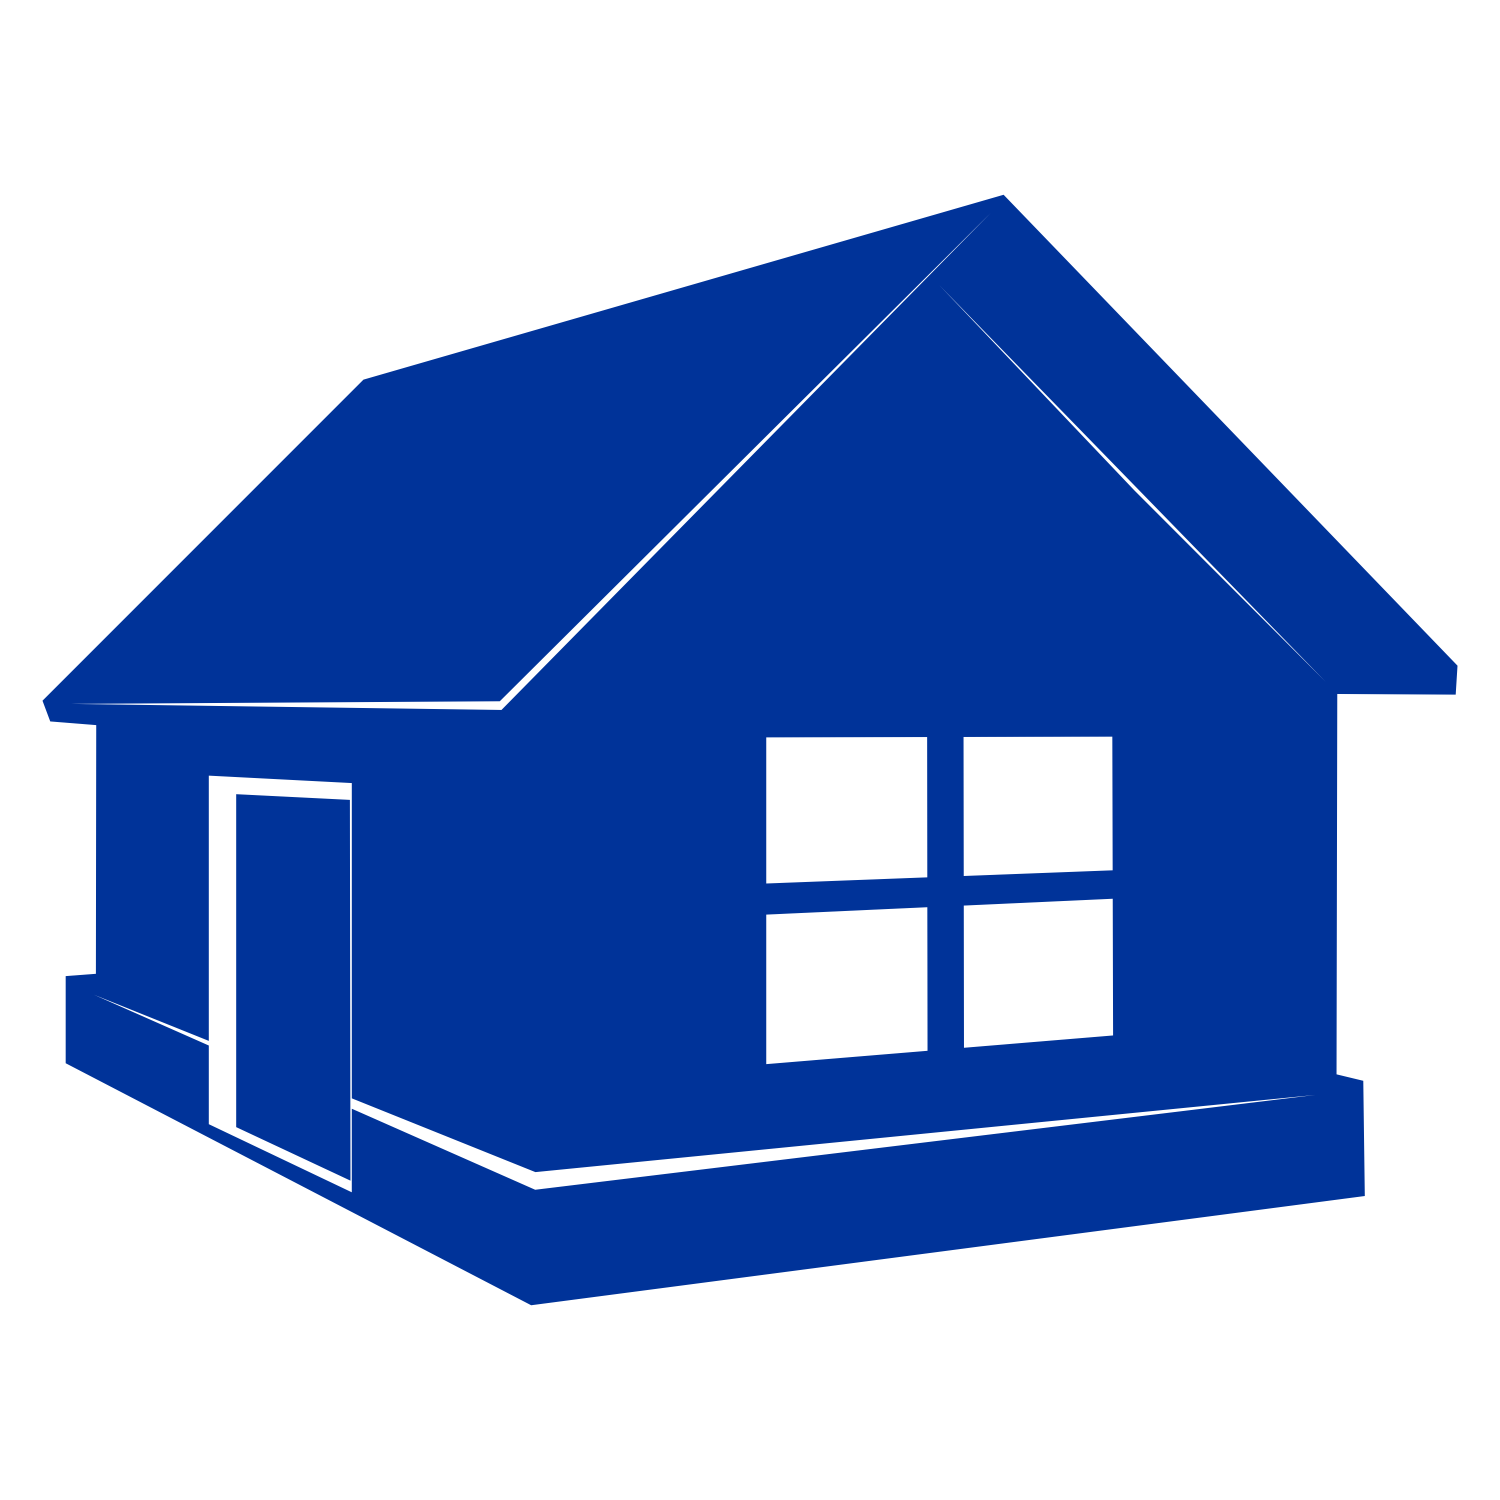 vector free download house - photo #39